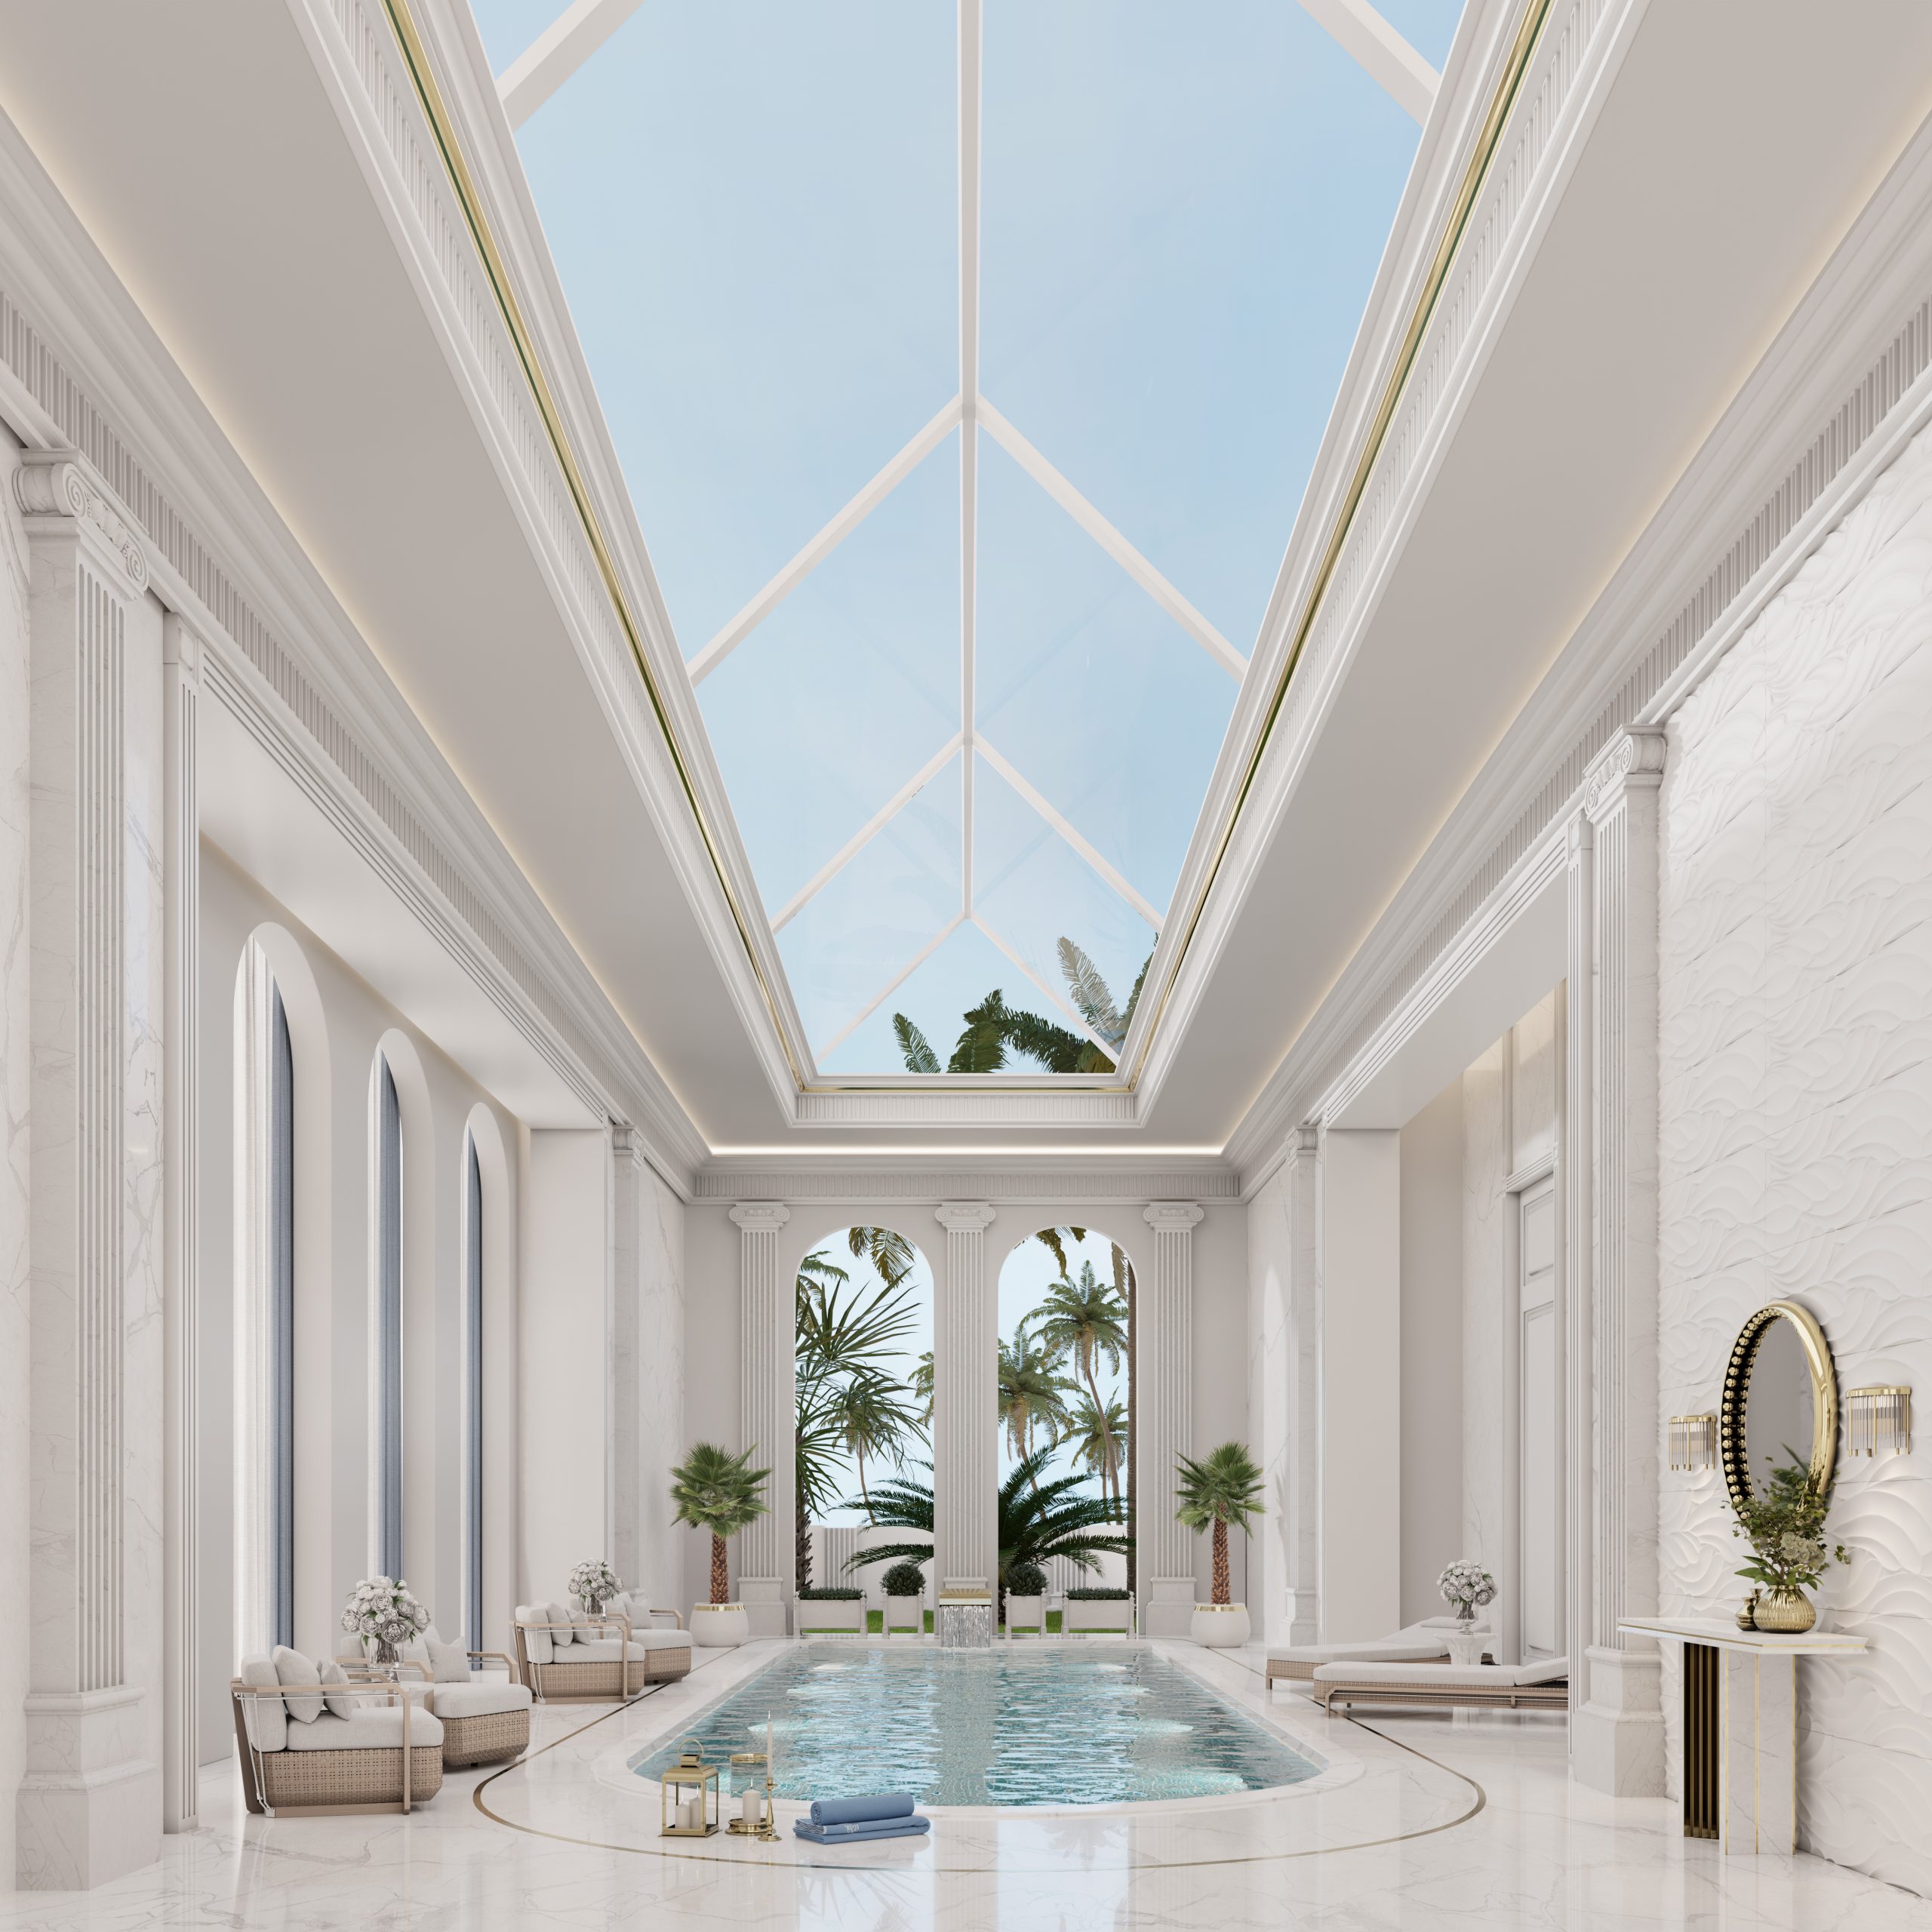 Indoor Pool Design With Stunning Decor And Relaxing Ambiance